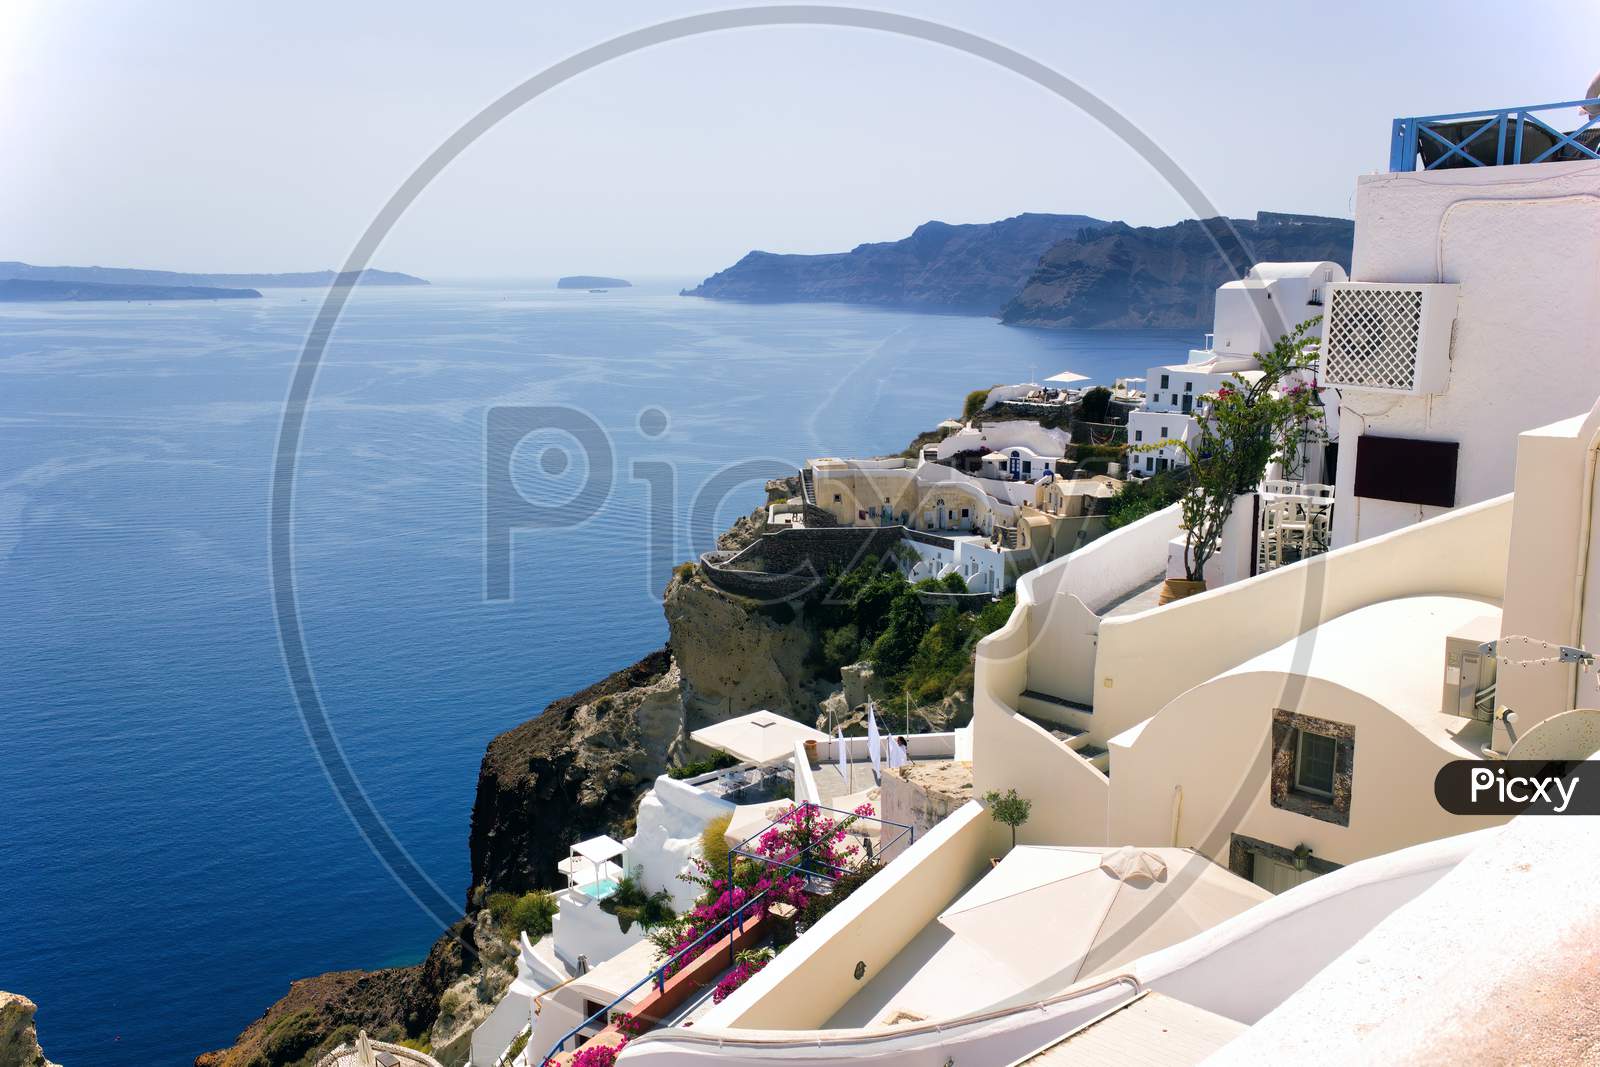 Cyclades Architecture Hotels Houses Over The Caldera In Oia Santorini Greek Islands, Greece, Mediterranean Sea View With Mountains